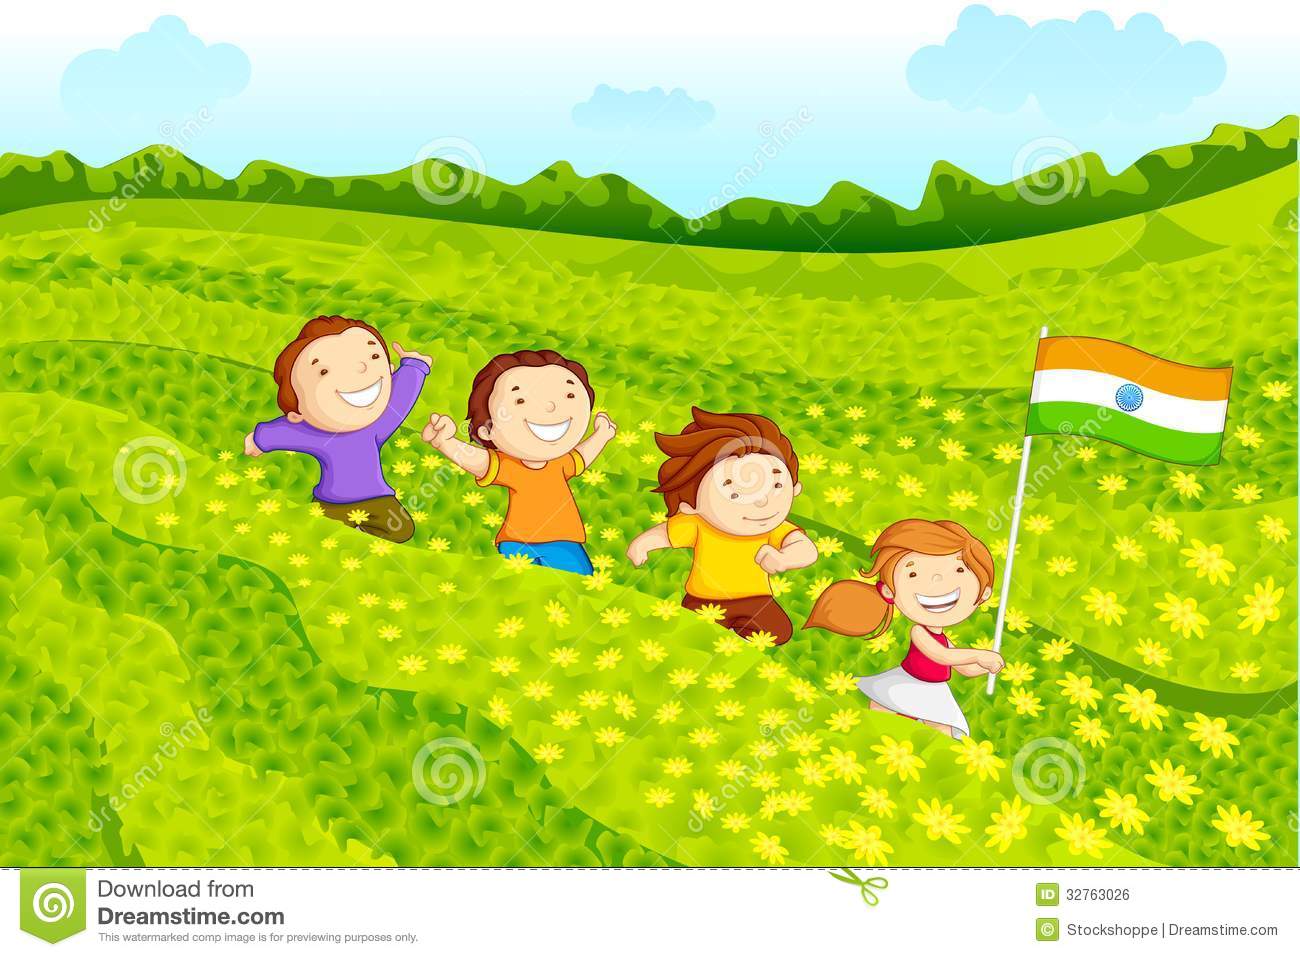 Kids With Indian Flag Royalty Free Stock Image   Image  32763026